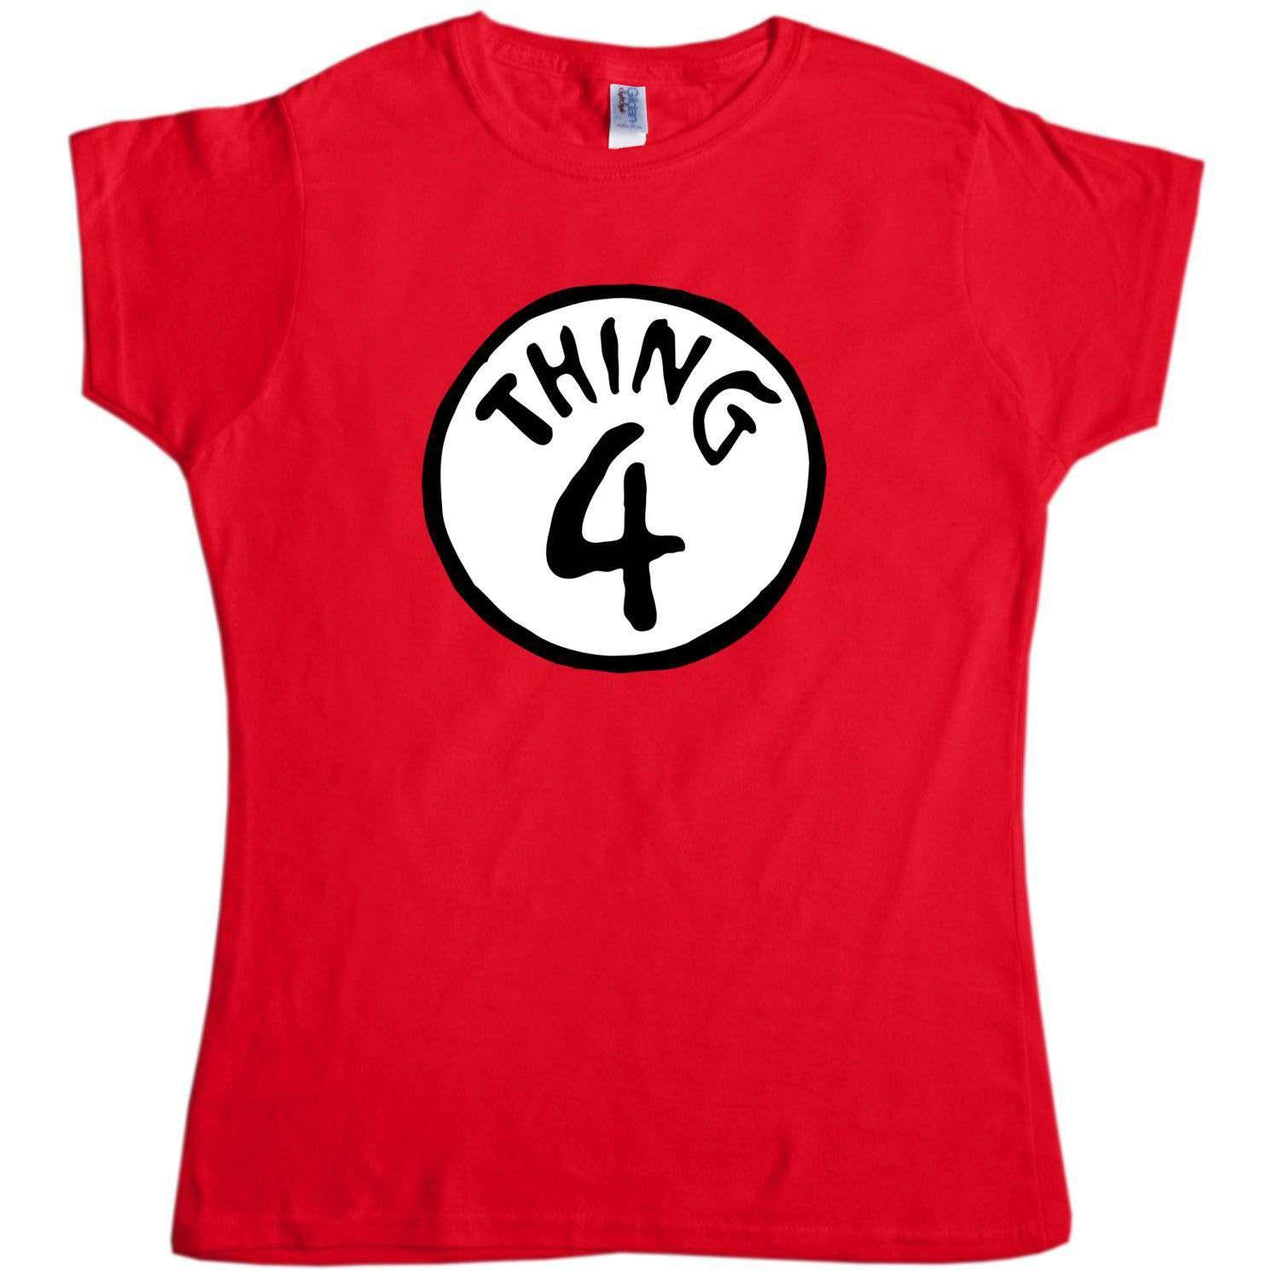 Cat In The Hat Thing 4 Womens Style T-Shirt 8Ball